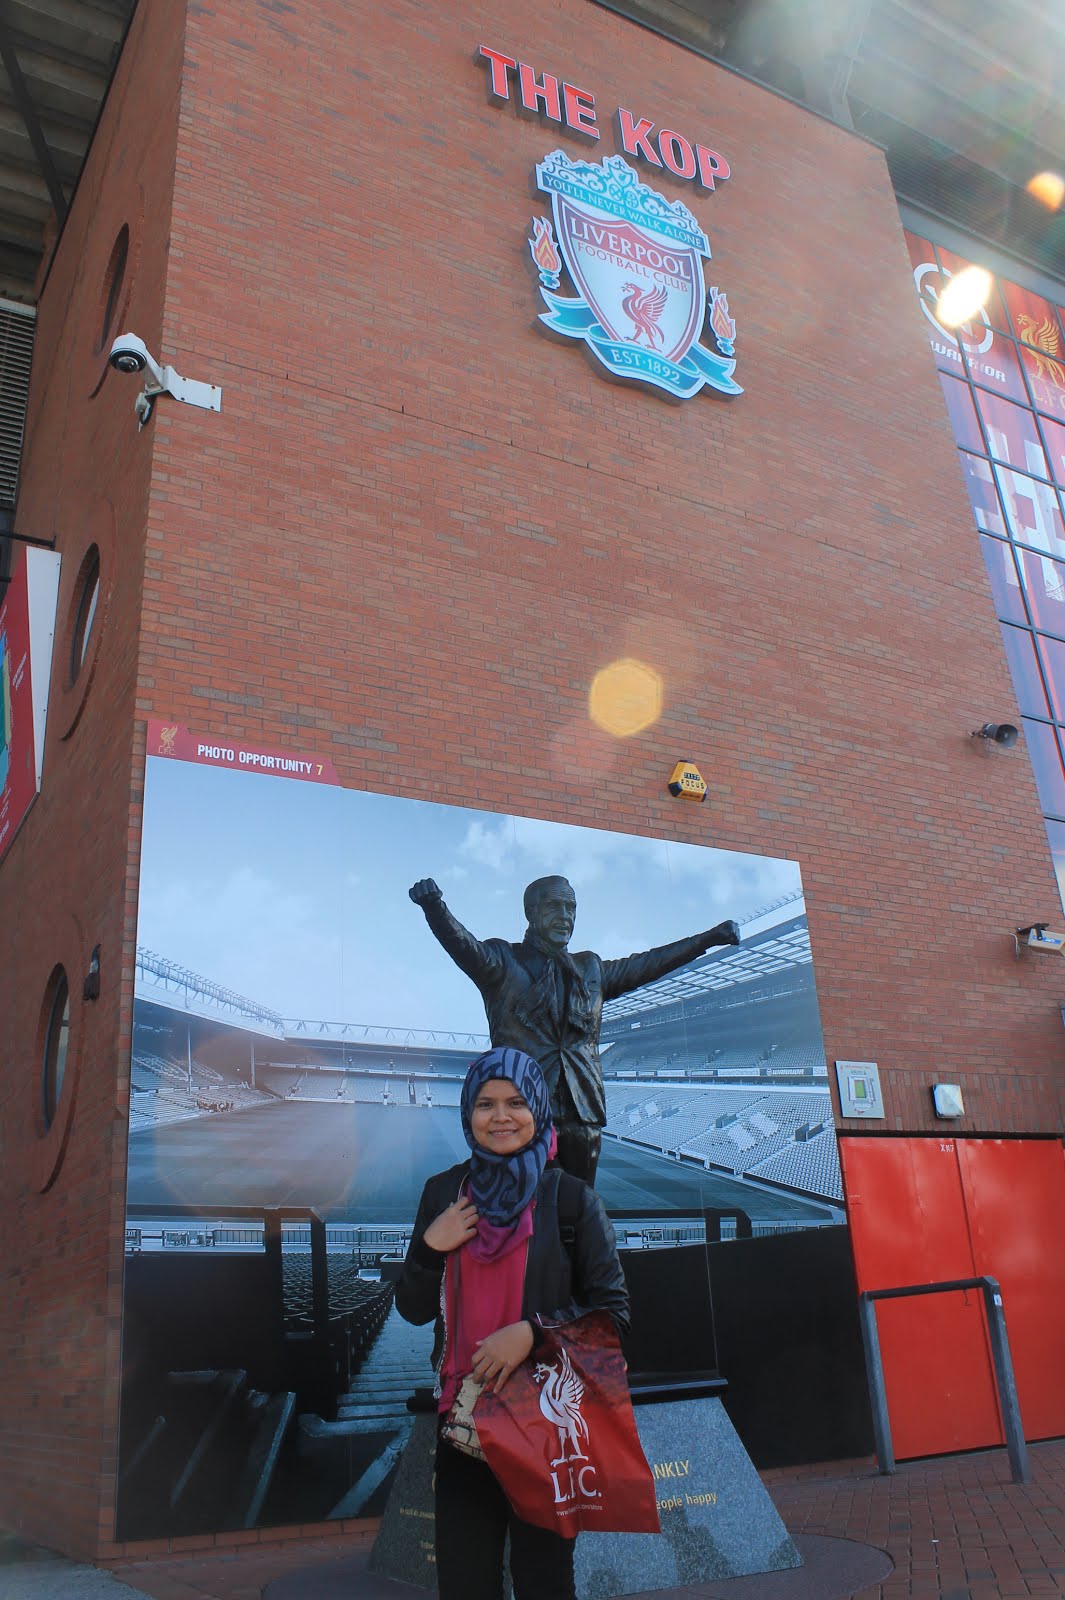 ANFIELD, LIVERPOOL